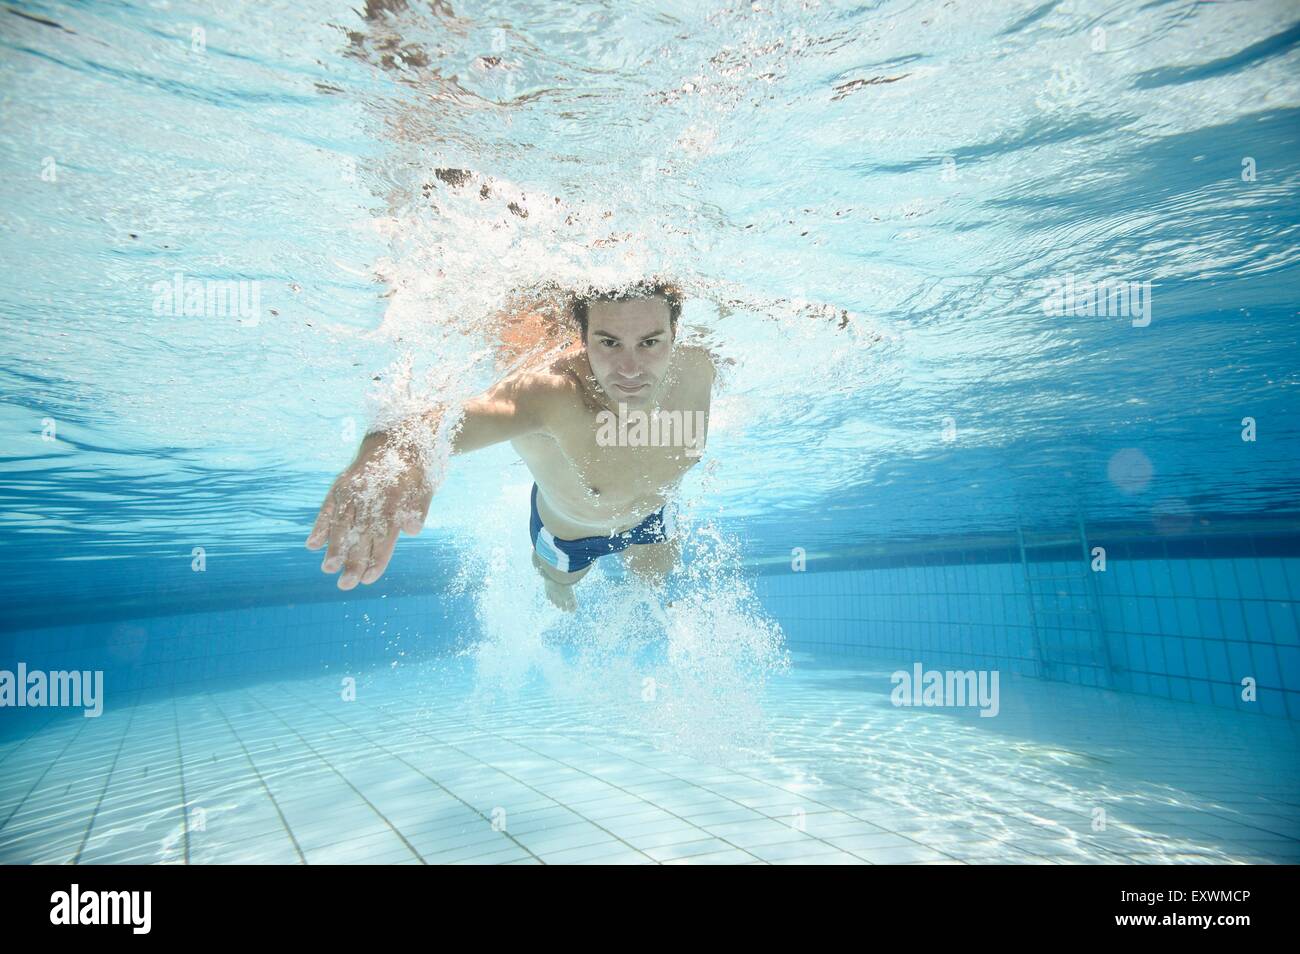 Man swimming under water in an open-air bath Stock Photo